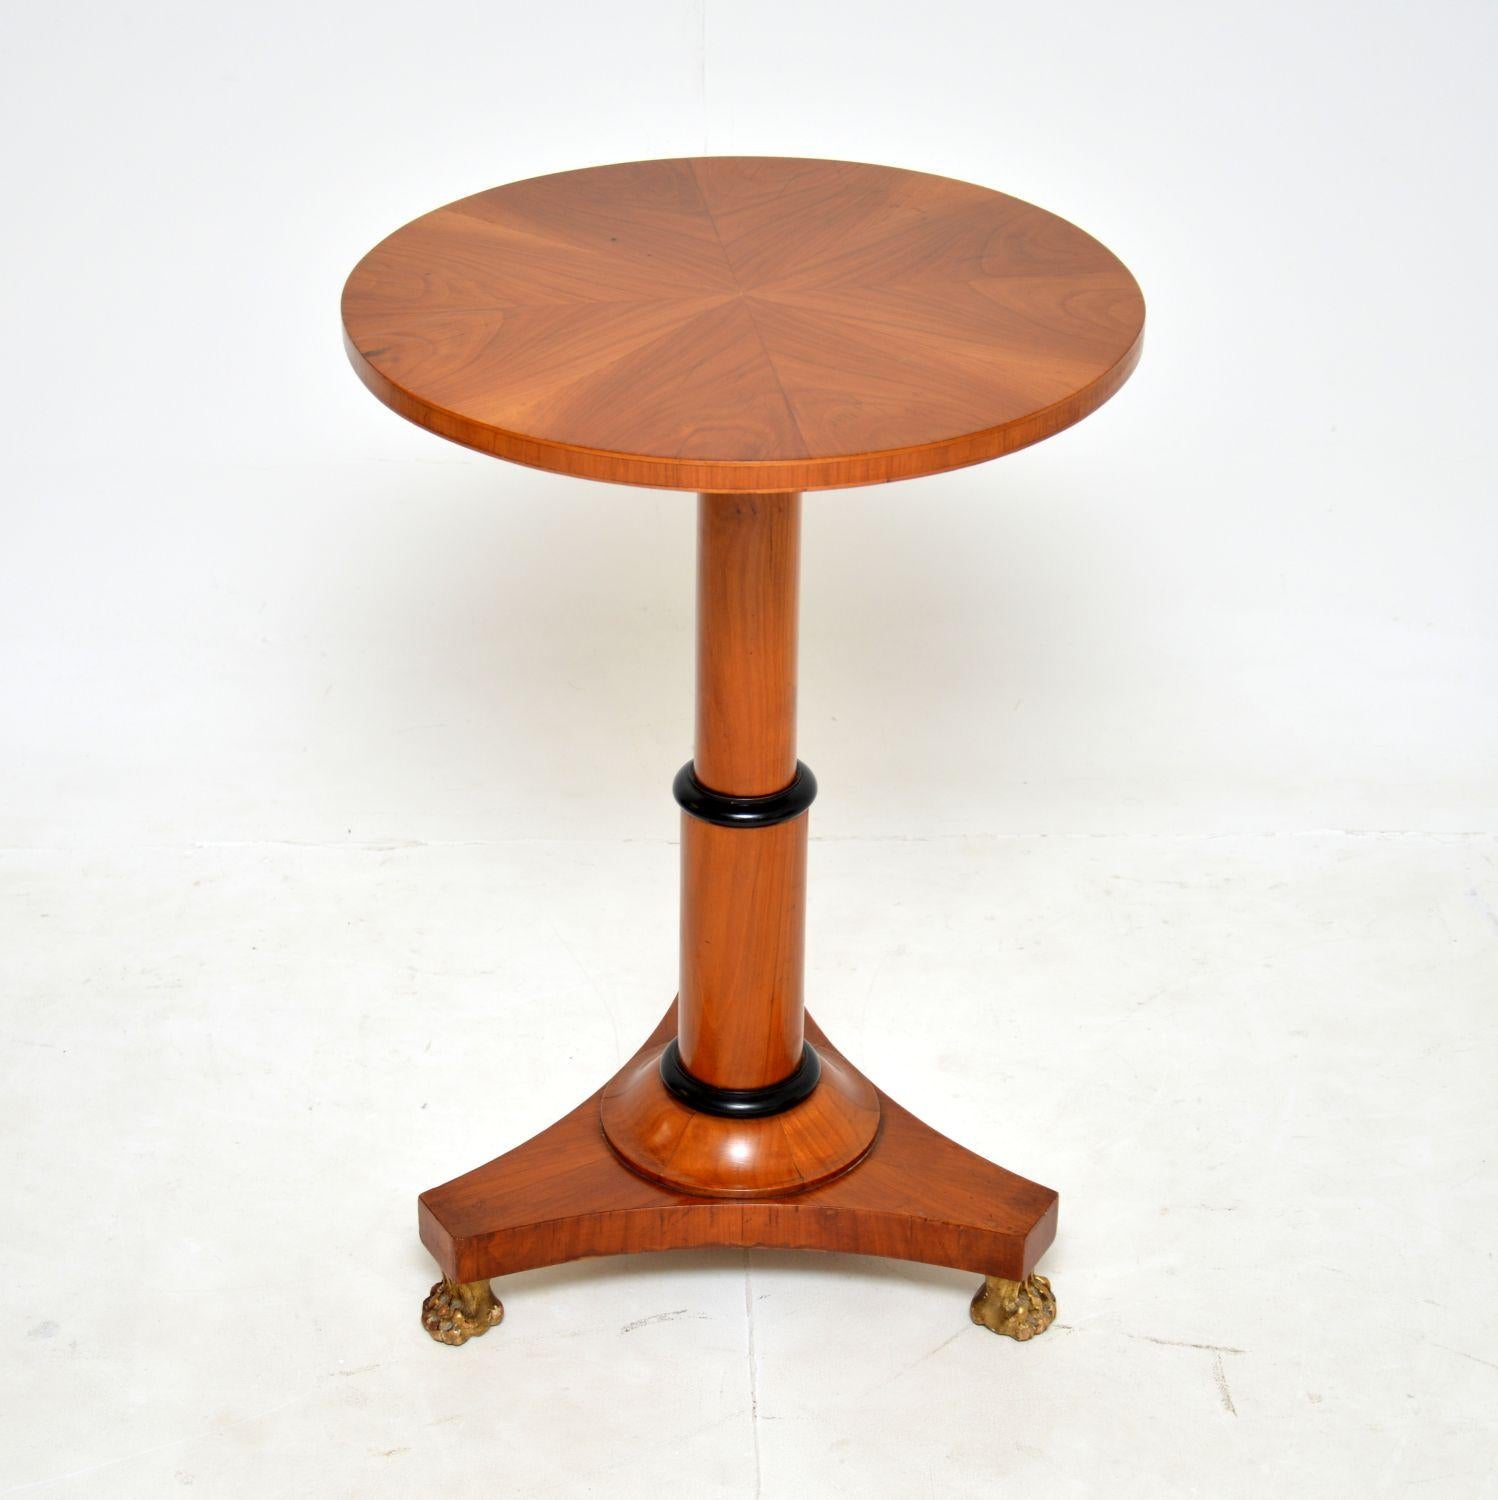 A stunning antique Swedish Biedermeier period occasional table in satin birch. This was made in Sweden and dates from around 1840-1860.

It is of amazing quality, the top has a segmented starburst veneer pattern. This sits on a baluster support with